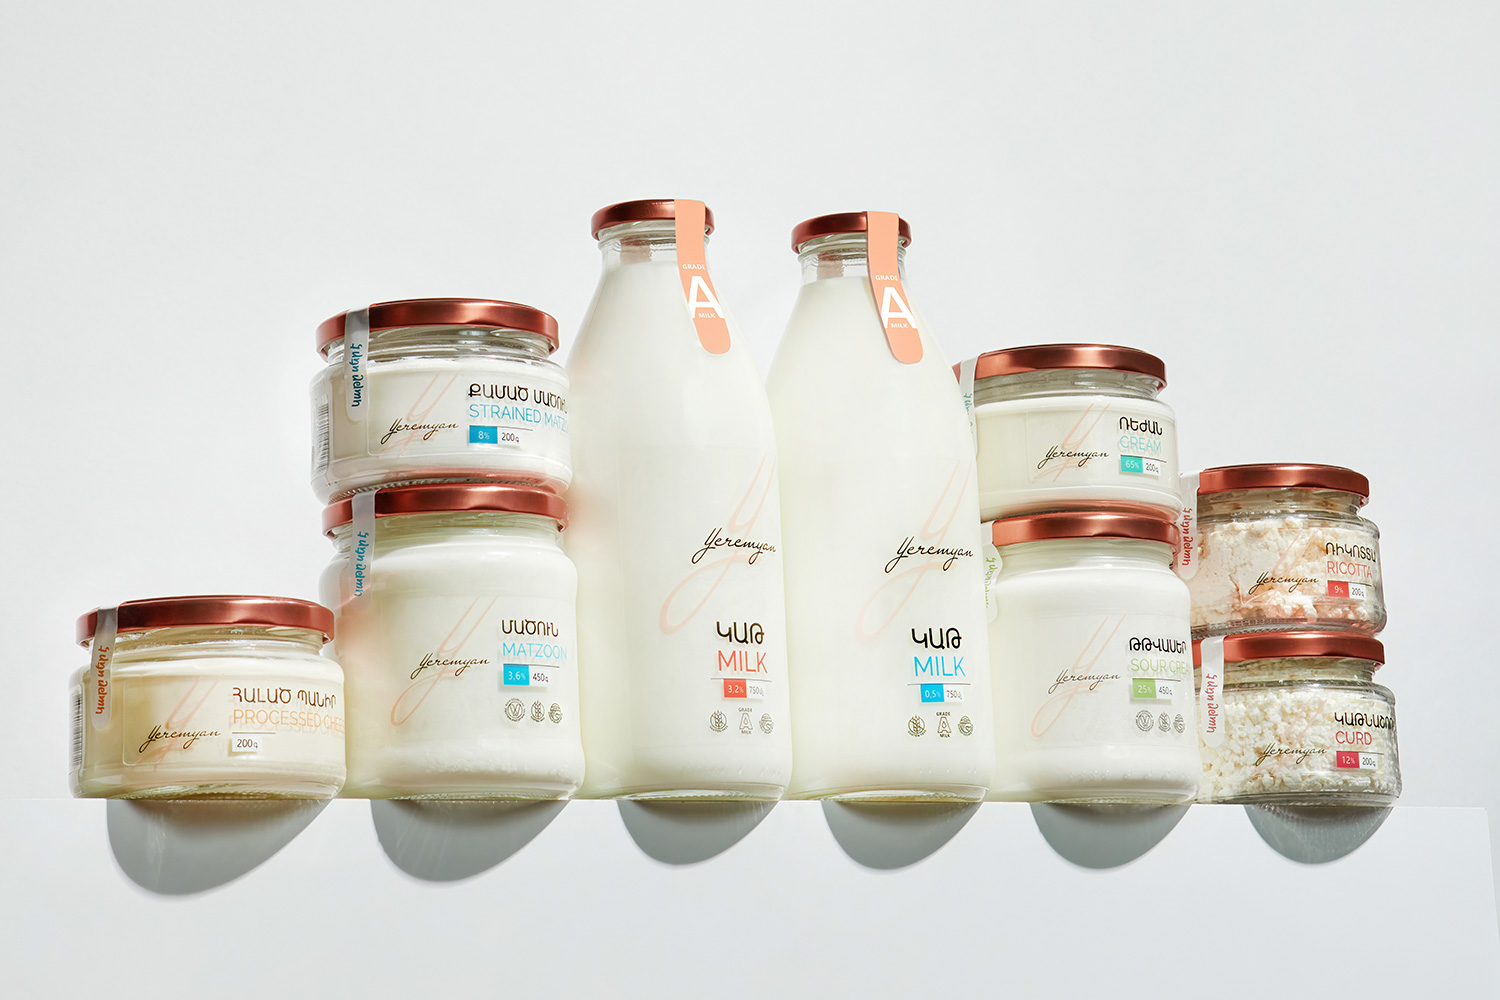 Yeremyan Products: Grade “A” dairy and complete information for consumer